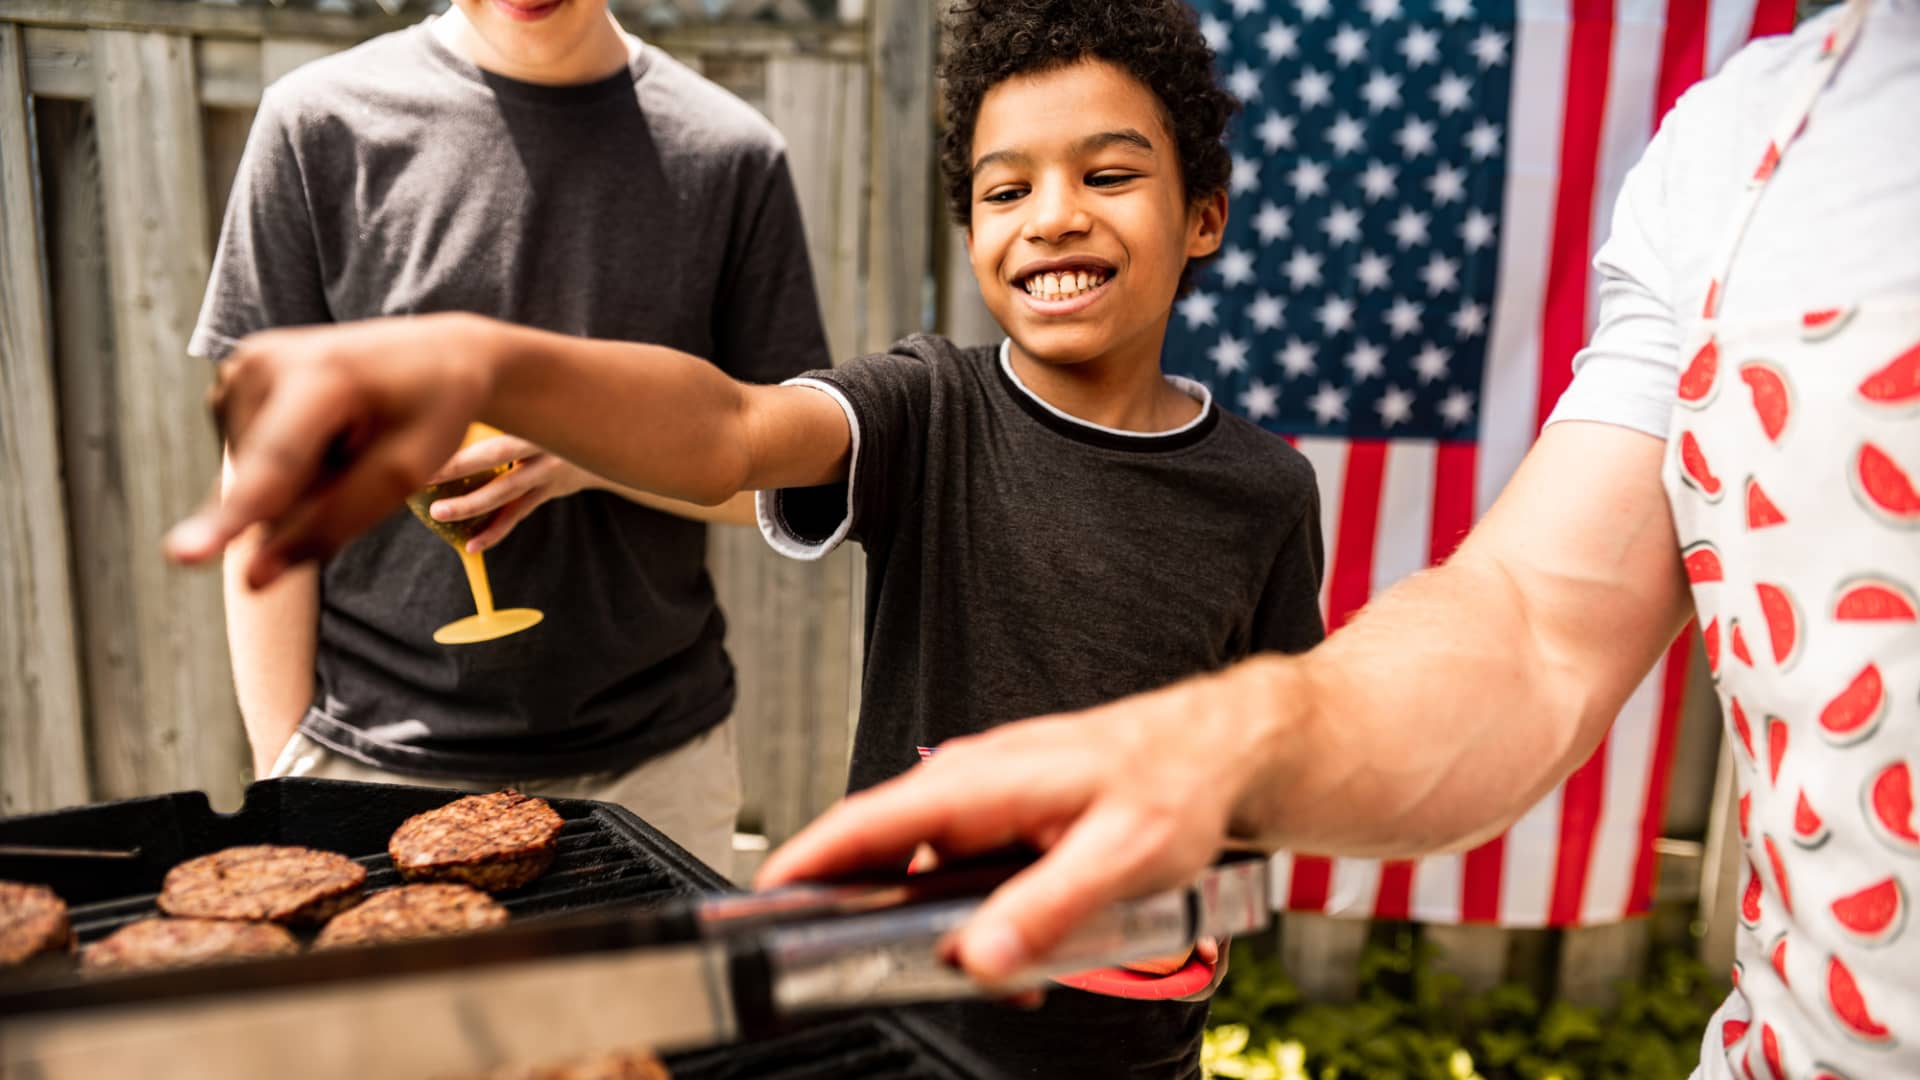 Celebrating Fourth of July: Home-Cooked Savings vs. Restaurant Costs